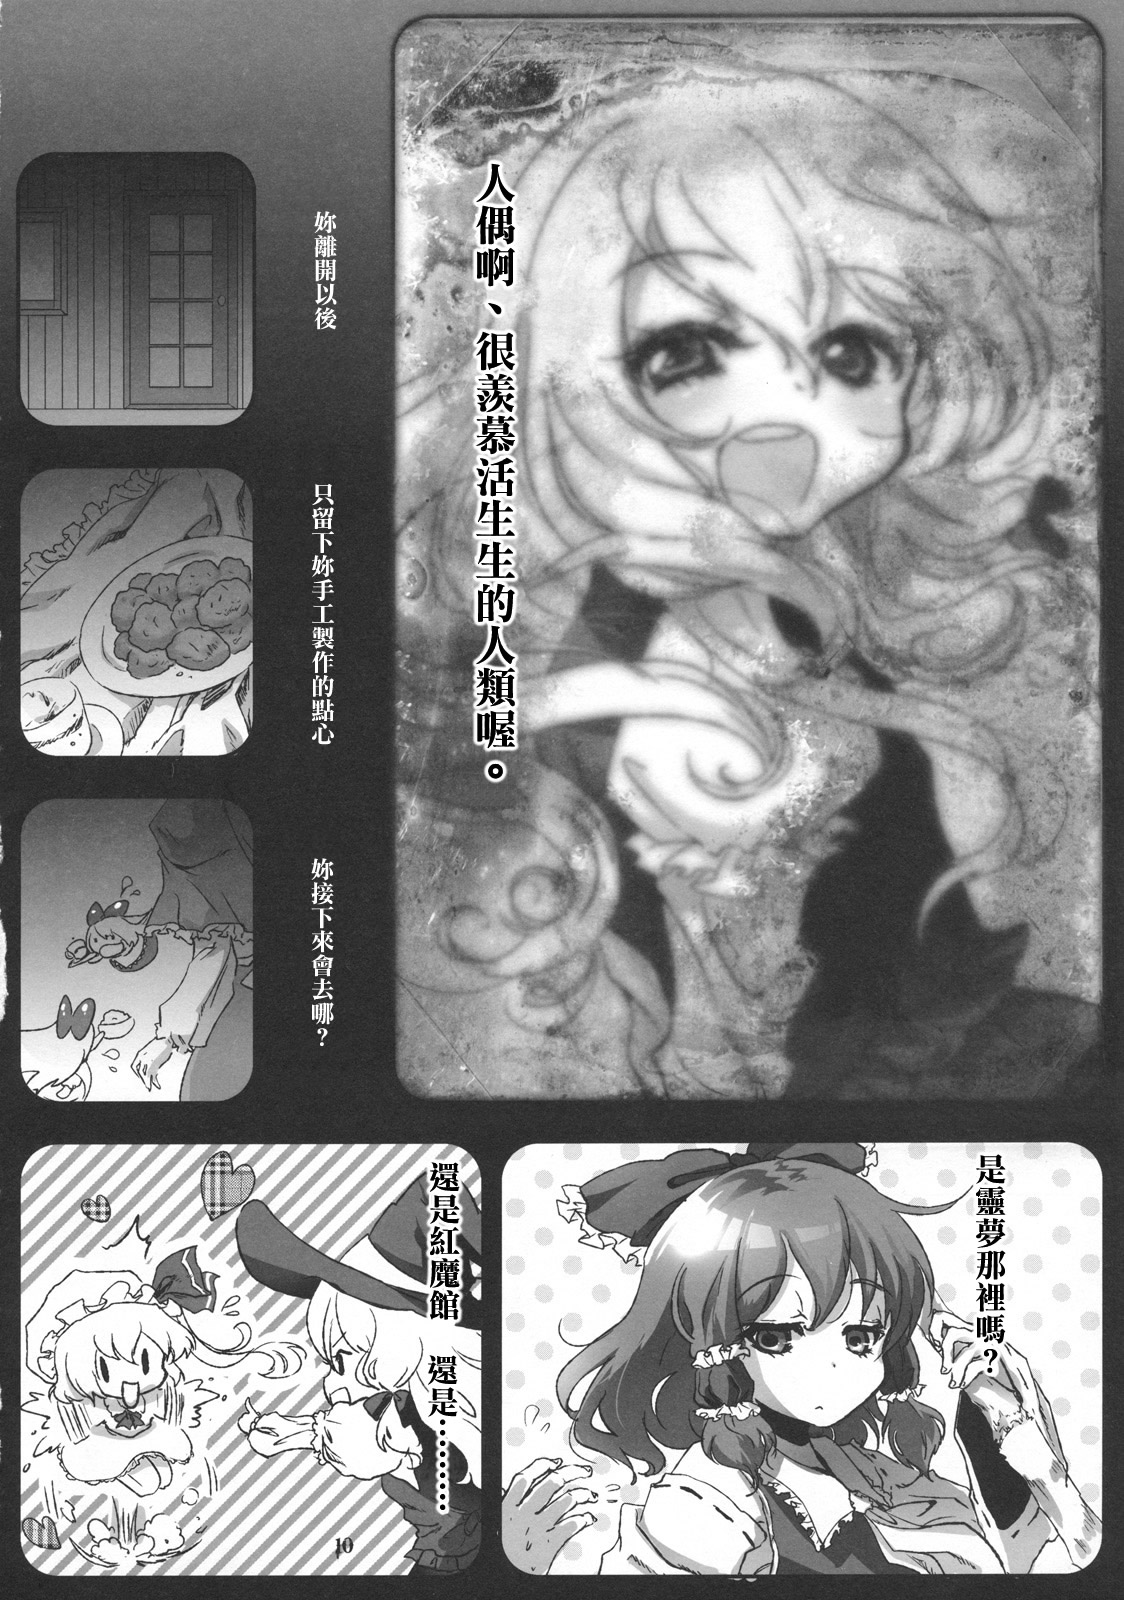 (C79) [Chaotic Wolf (Inuboe)] FILTH IN THE ENVY (Touhou Project) [Chinese] [Genesis漢化] (C79) (同人誌) [Chaotic Wolf (狗吠)] FILTH IN THE ENVY (東方) [中国翻訳]